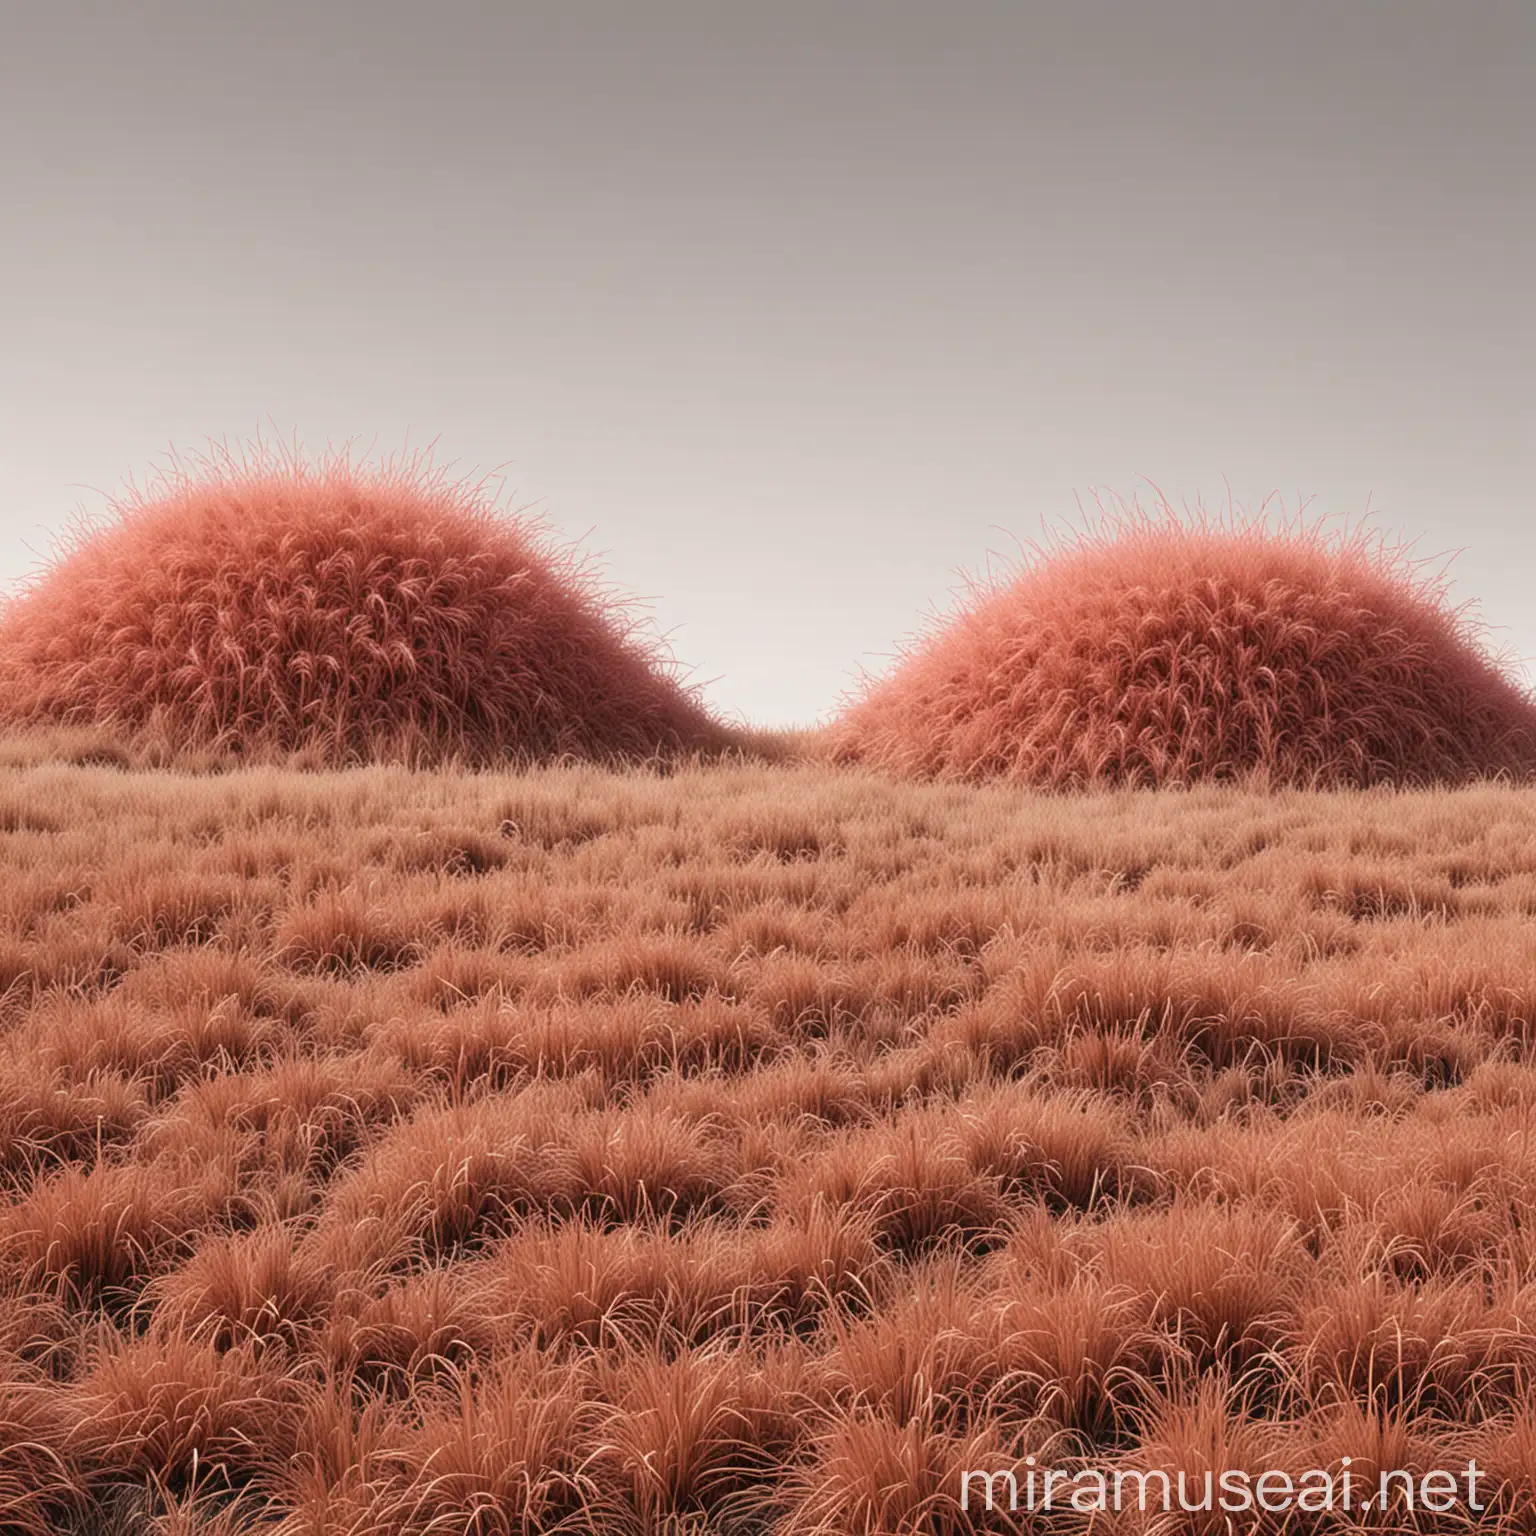 grass well cut realistic drawing, dusty piles, light red, pink and brown grass, fether like rendering monochrome, sketchfab, with 100% white background, sprite sheet, spread sheet of well cut grass realistic drawing, in a front view prospective